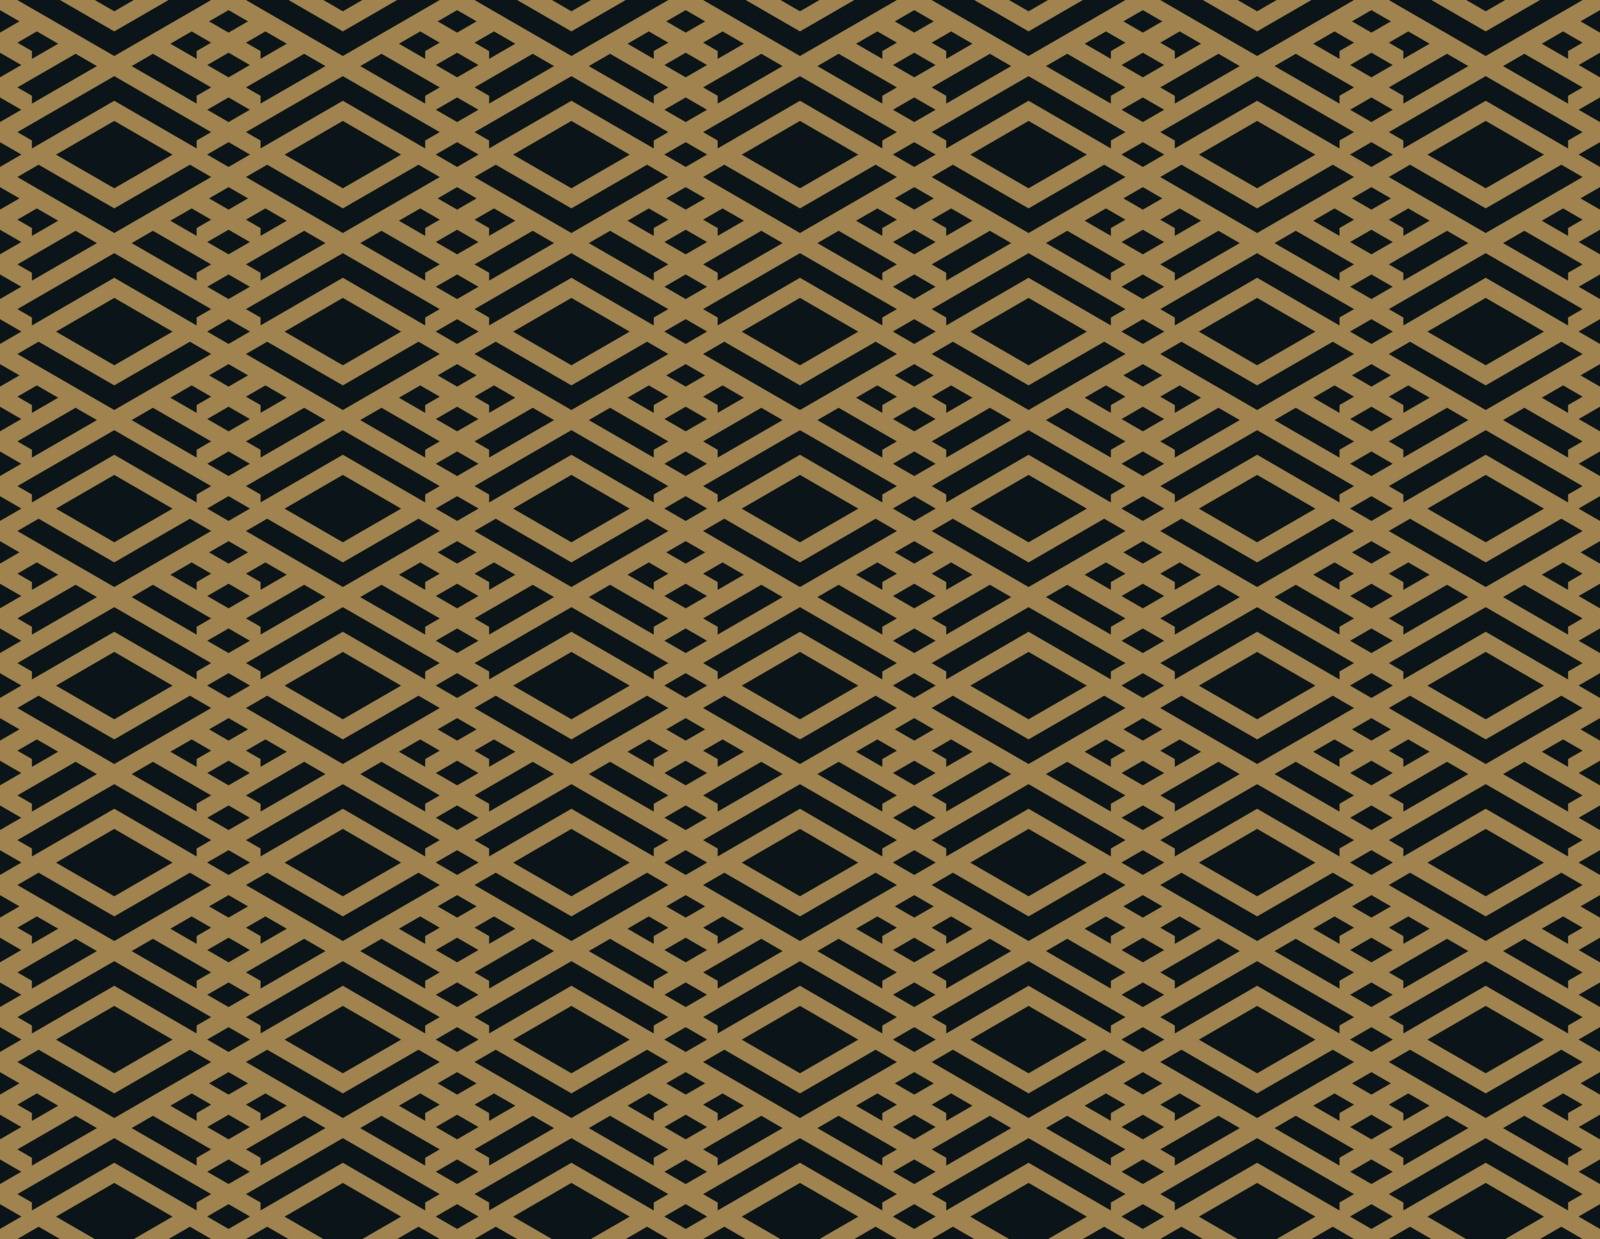 Vector seamless pattern. Modern stylish texture. Repeating geome by ANITA